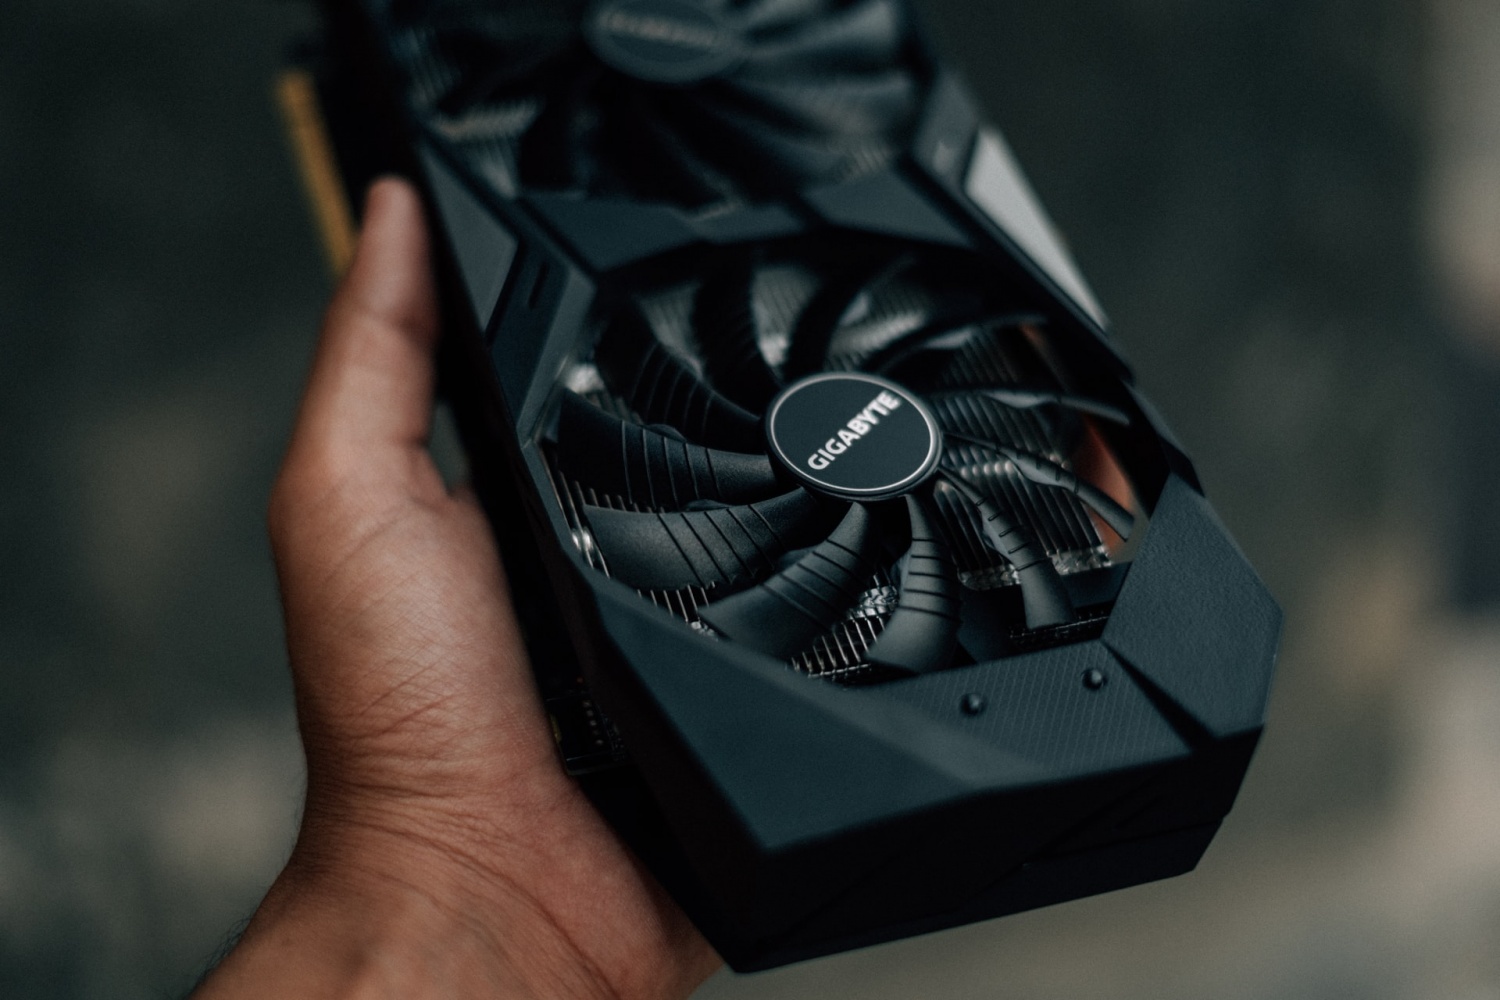 NVIDIA RTX 30-Series Super Cards Specs Leaked on Twitter By Prominent Tipster: Alleged GA102 GPU Could Come Soon